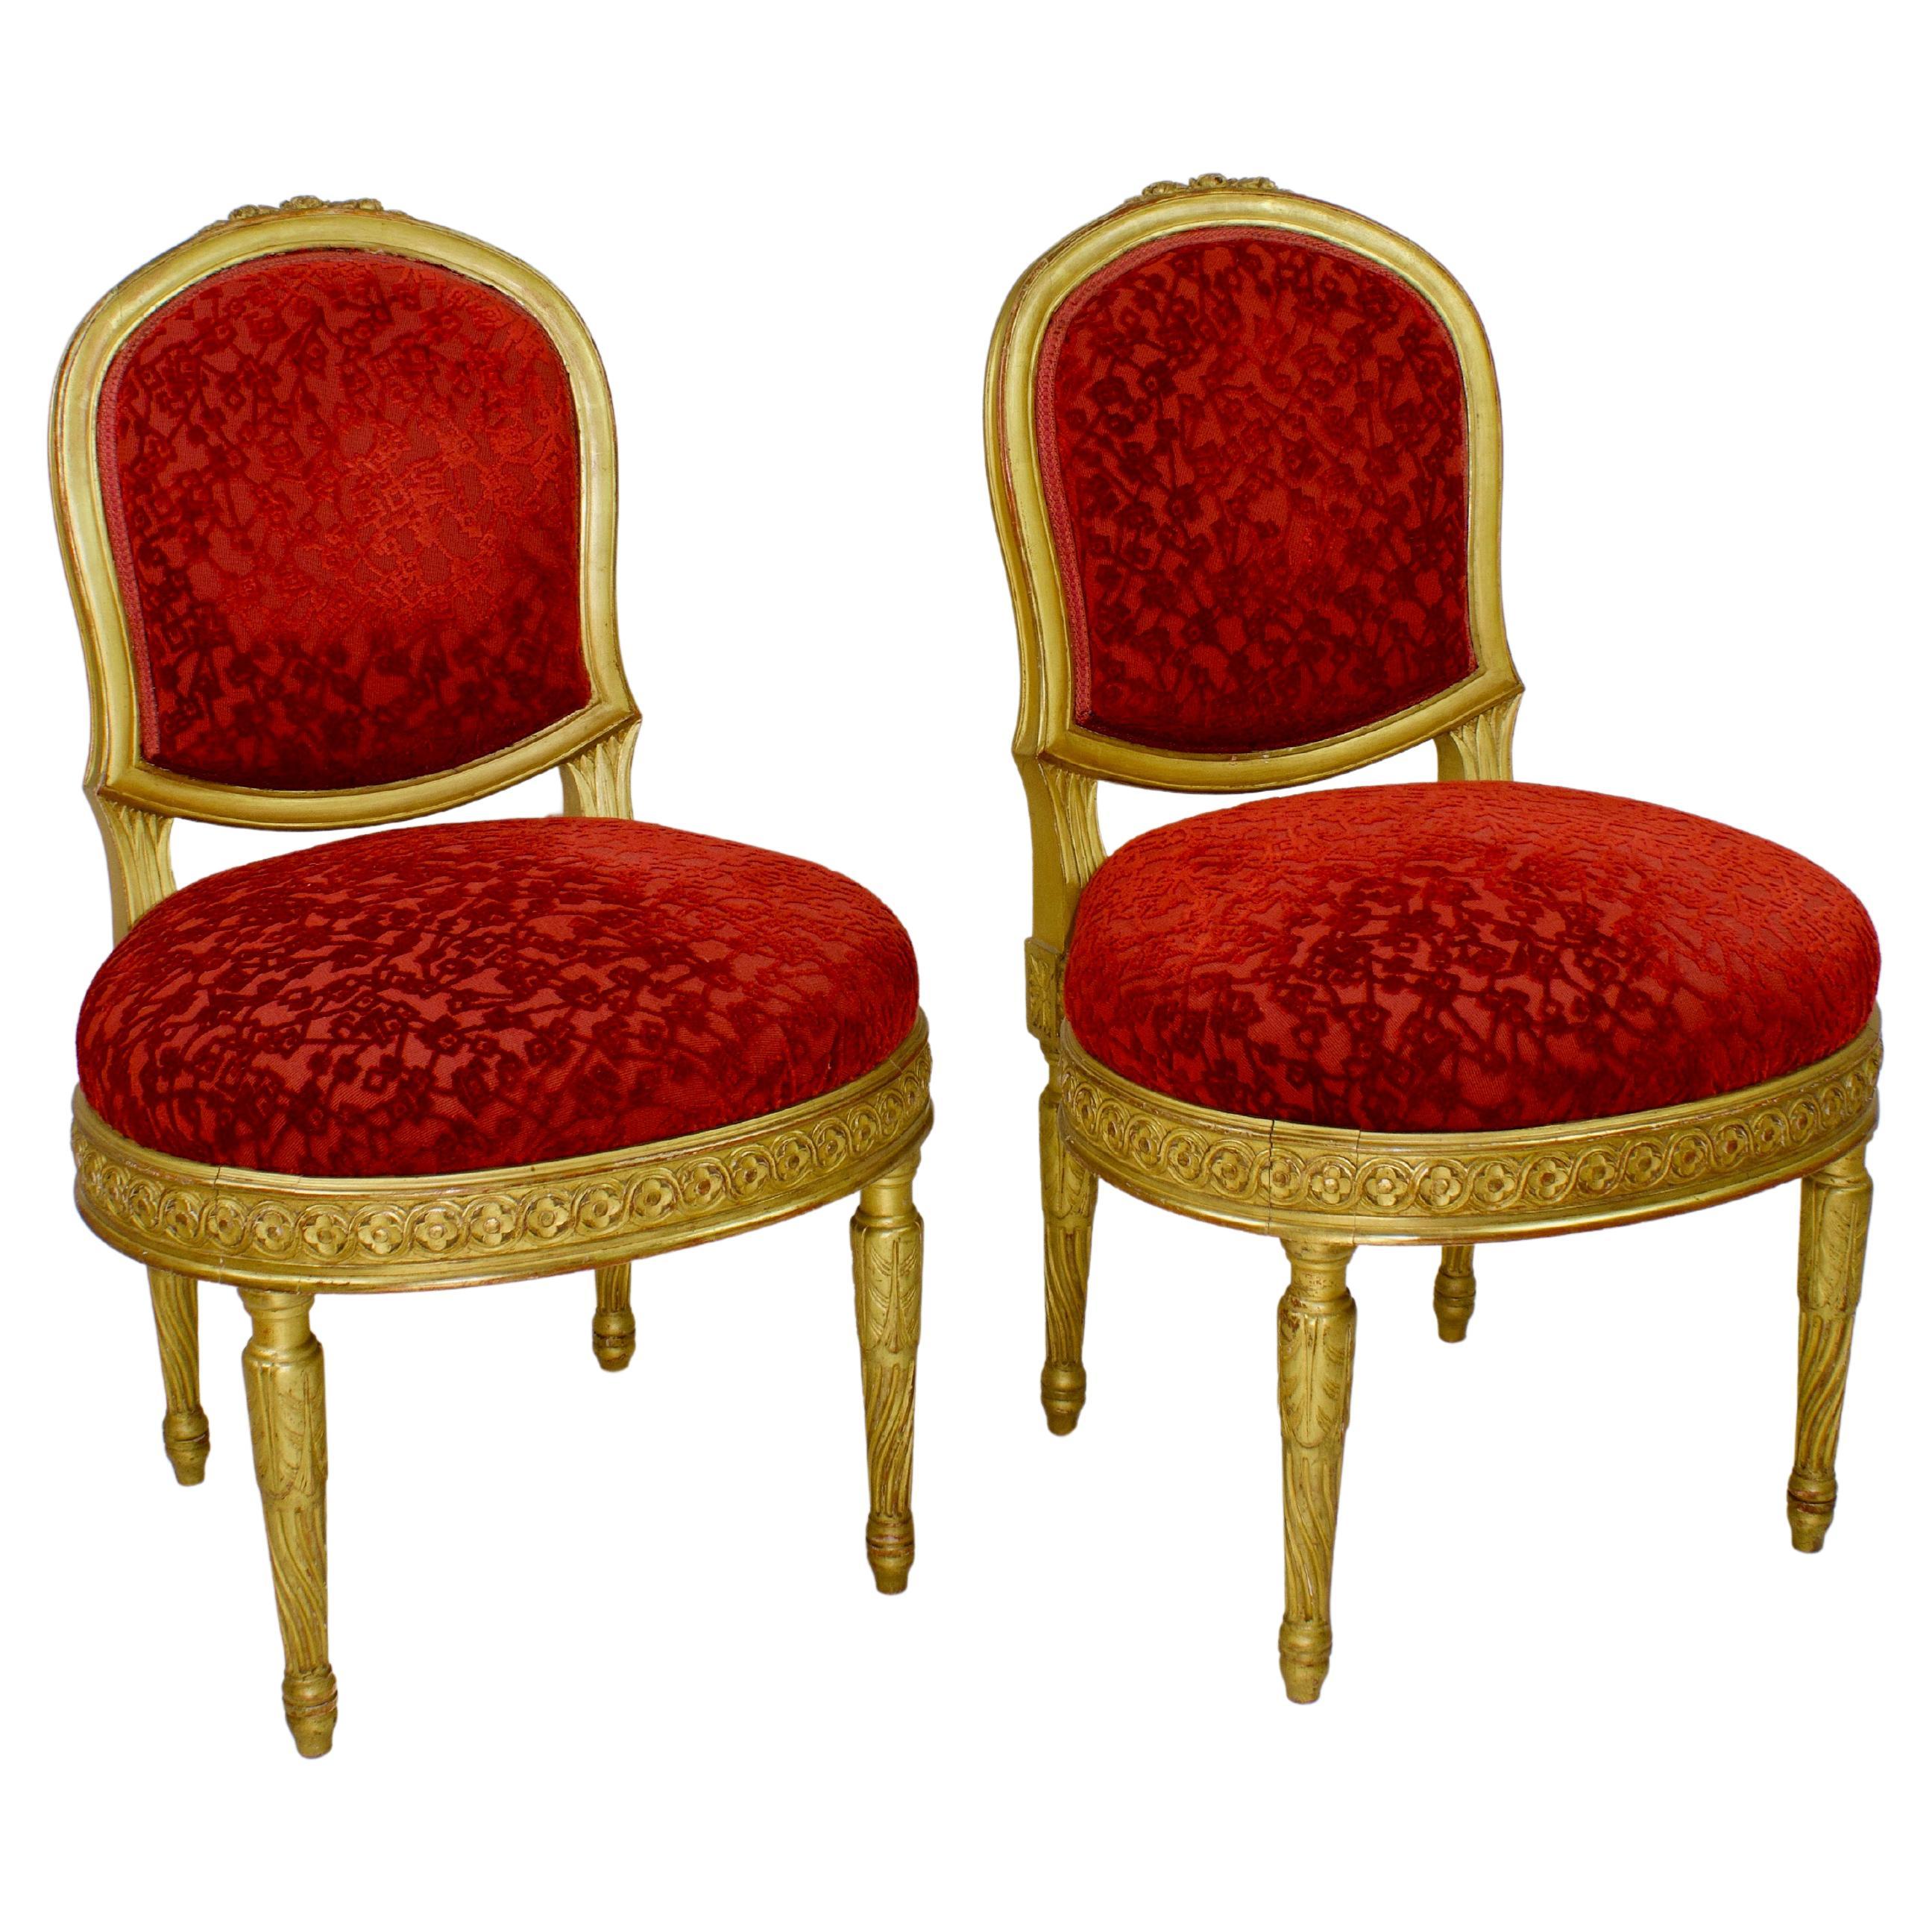 Pair of 19th Century Louis XVI Gilt Wood Side Chairs